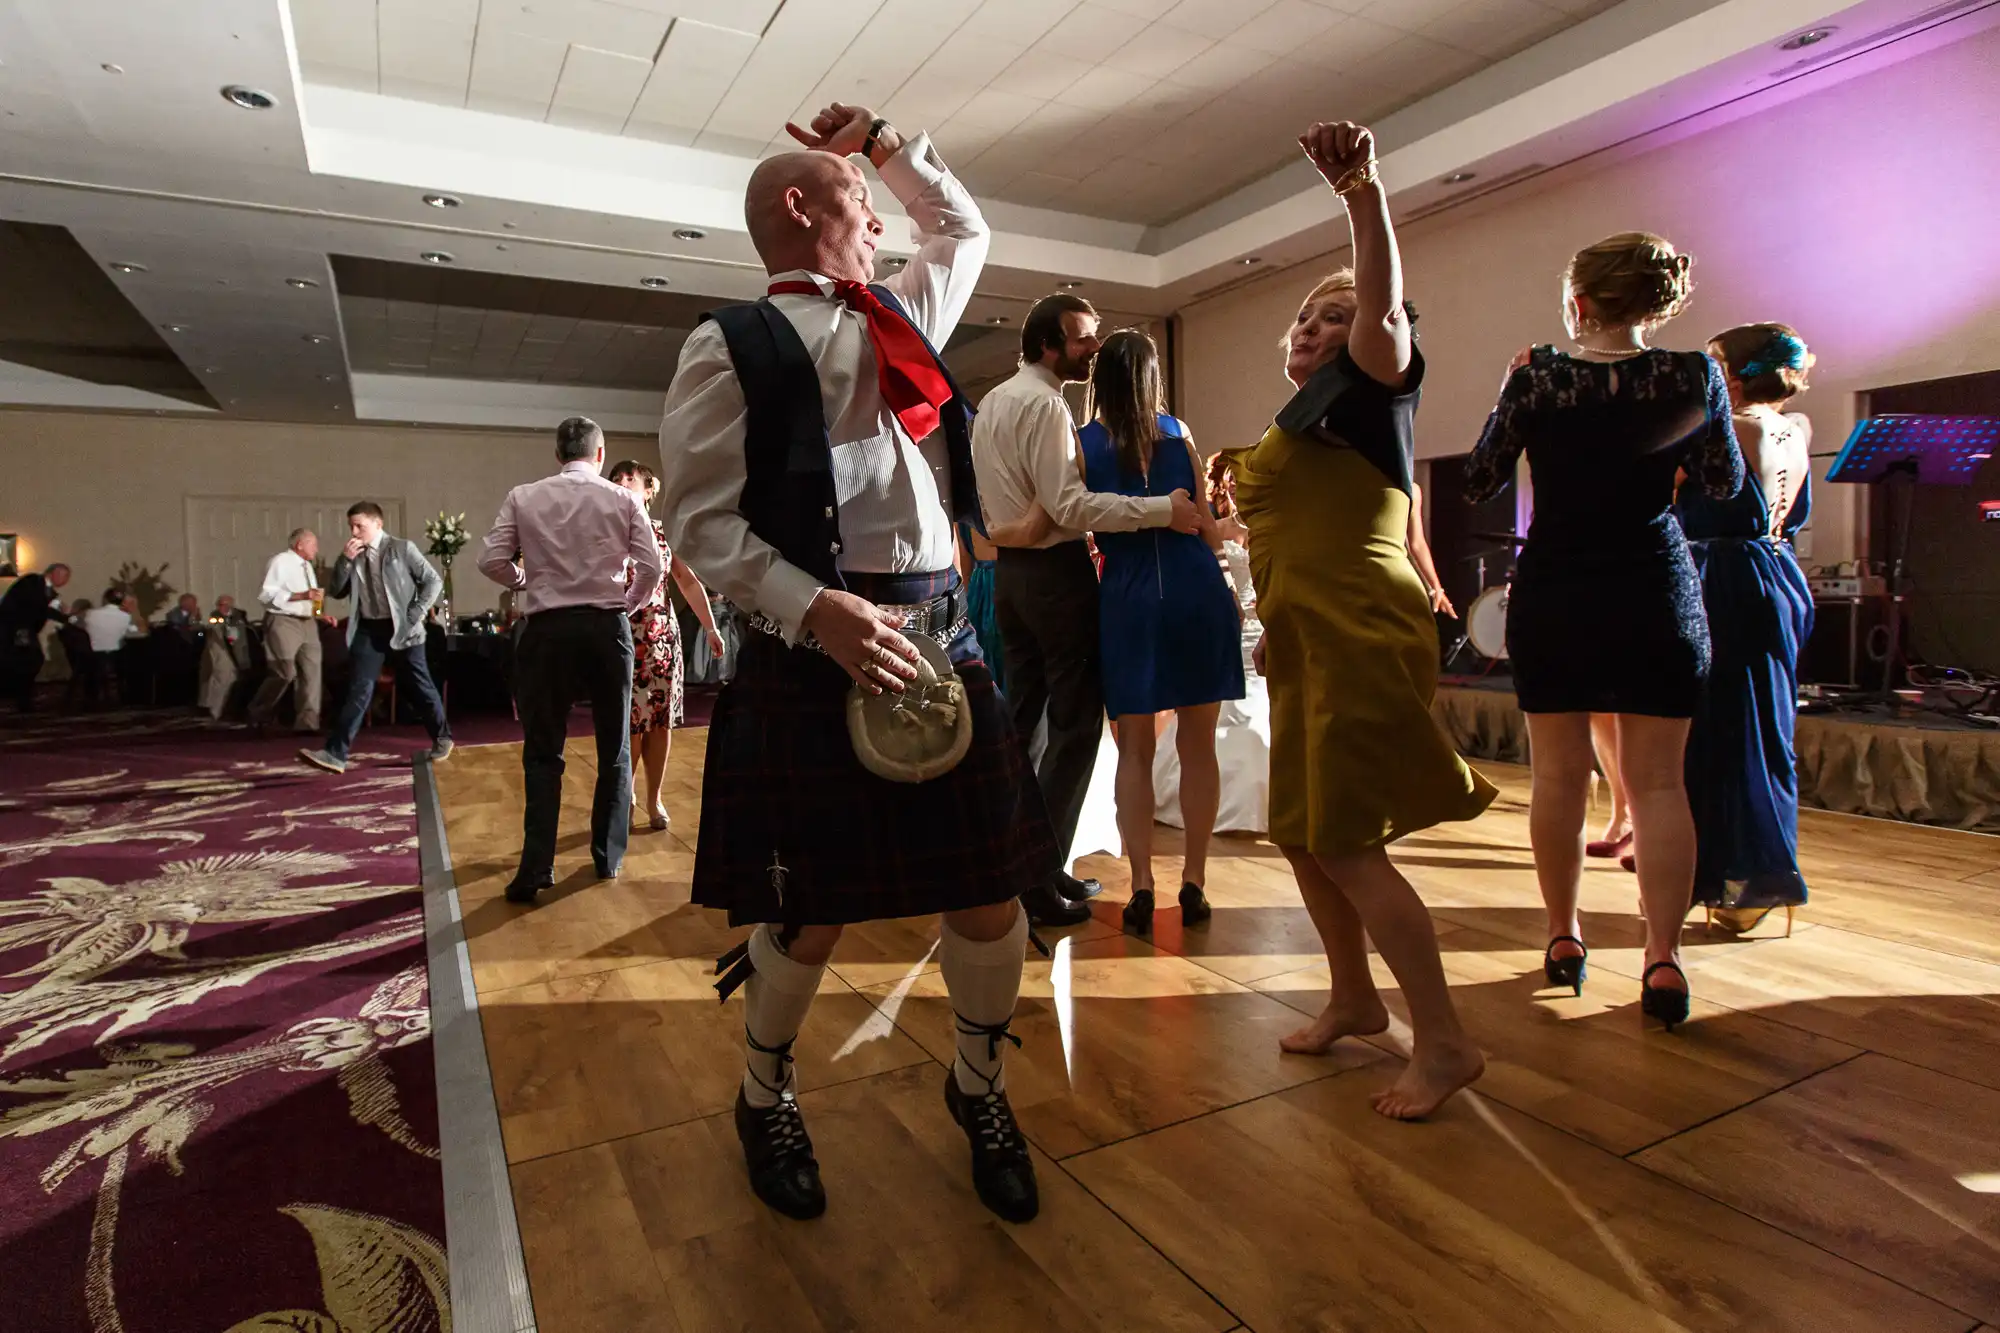 People dancing energetically at an indoor celebration, one man wearing a traditional kilt. brightly lit room with dancing couples and a colorful lighting setup in the background.